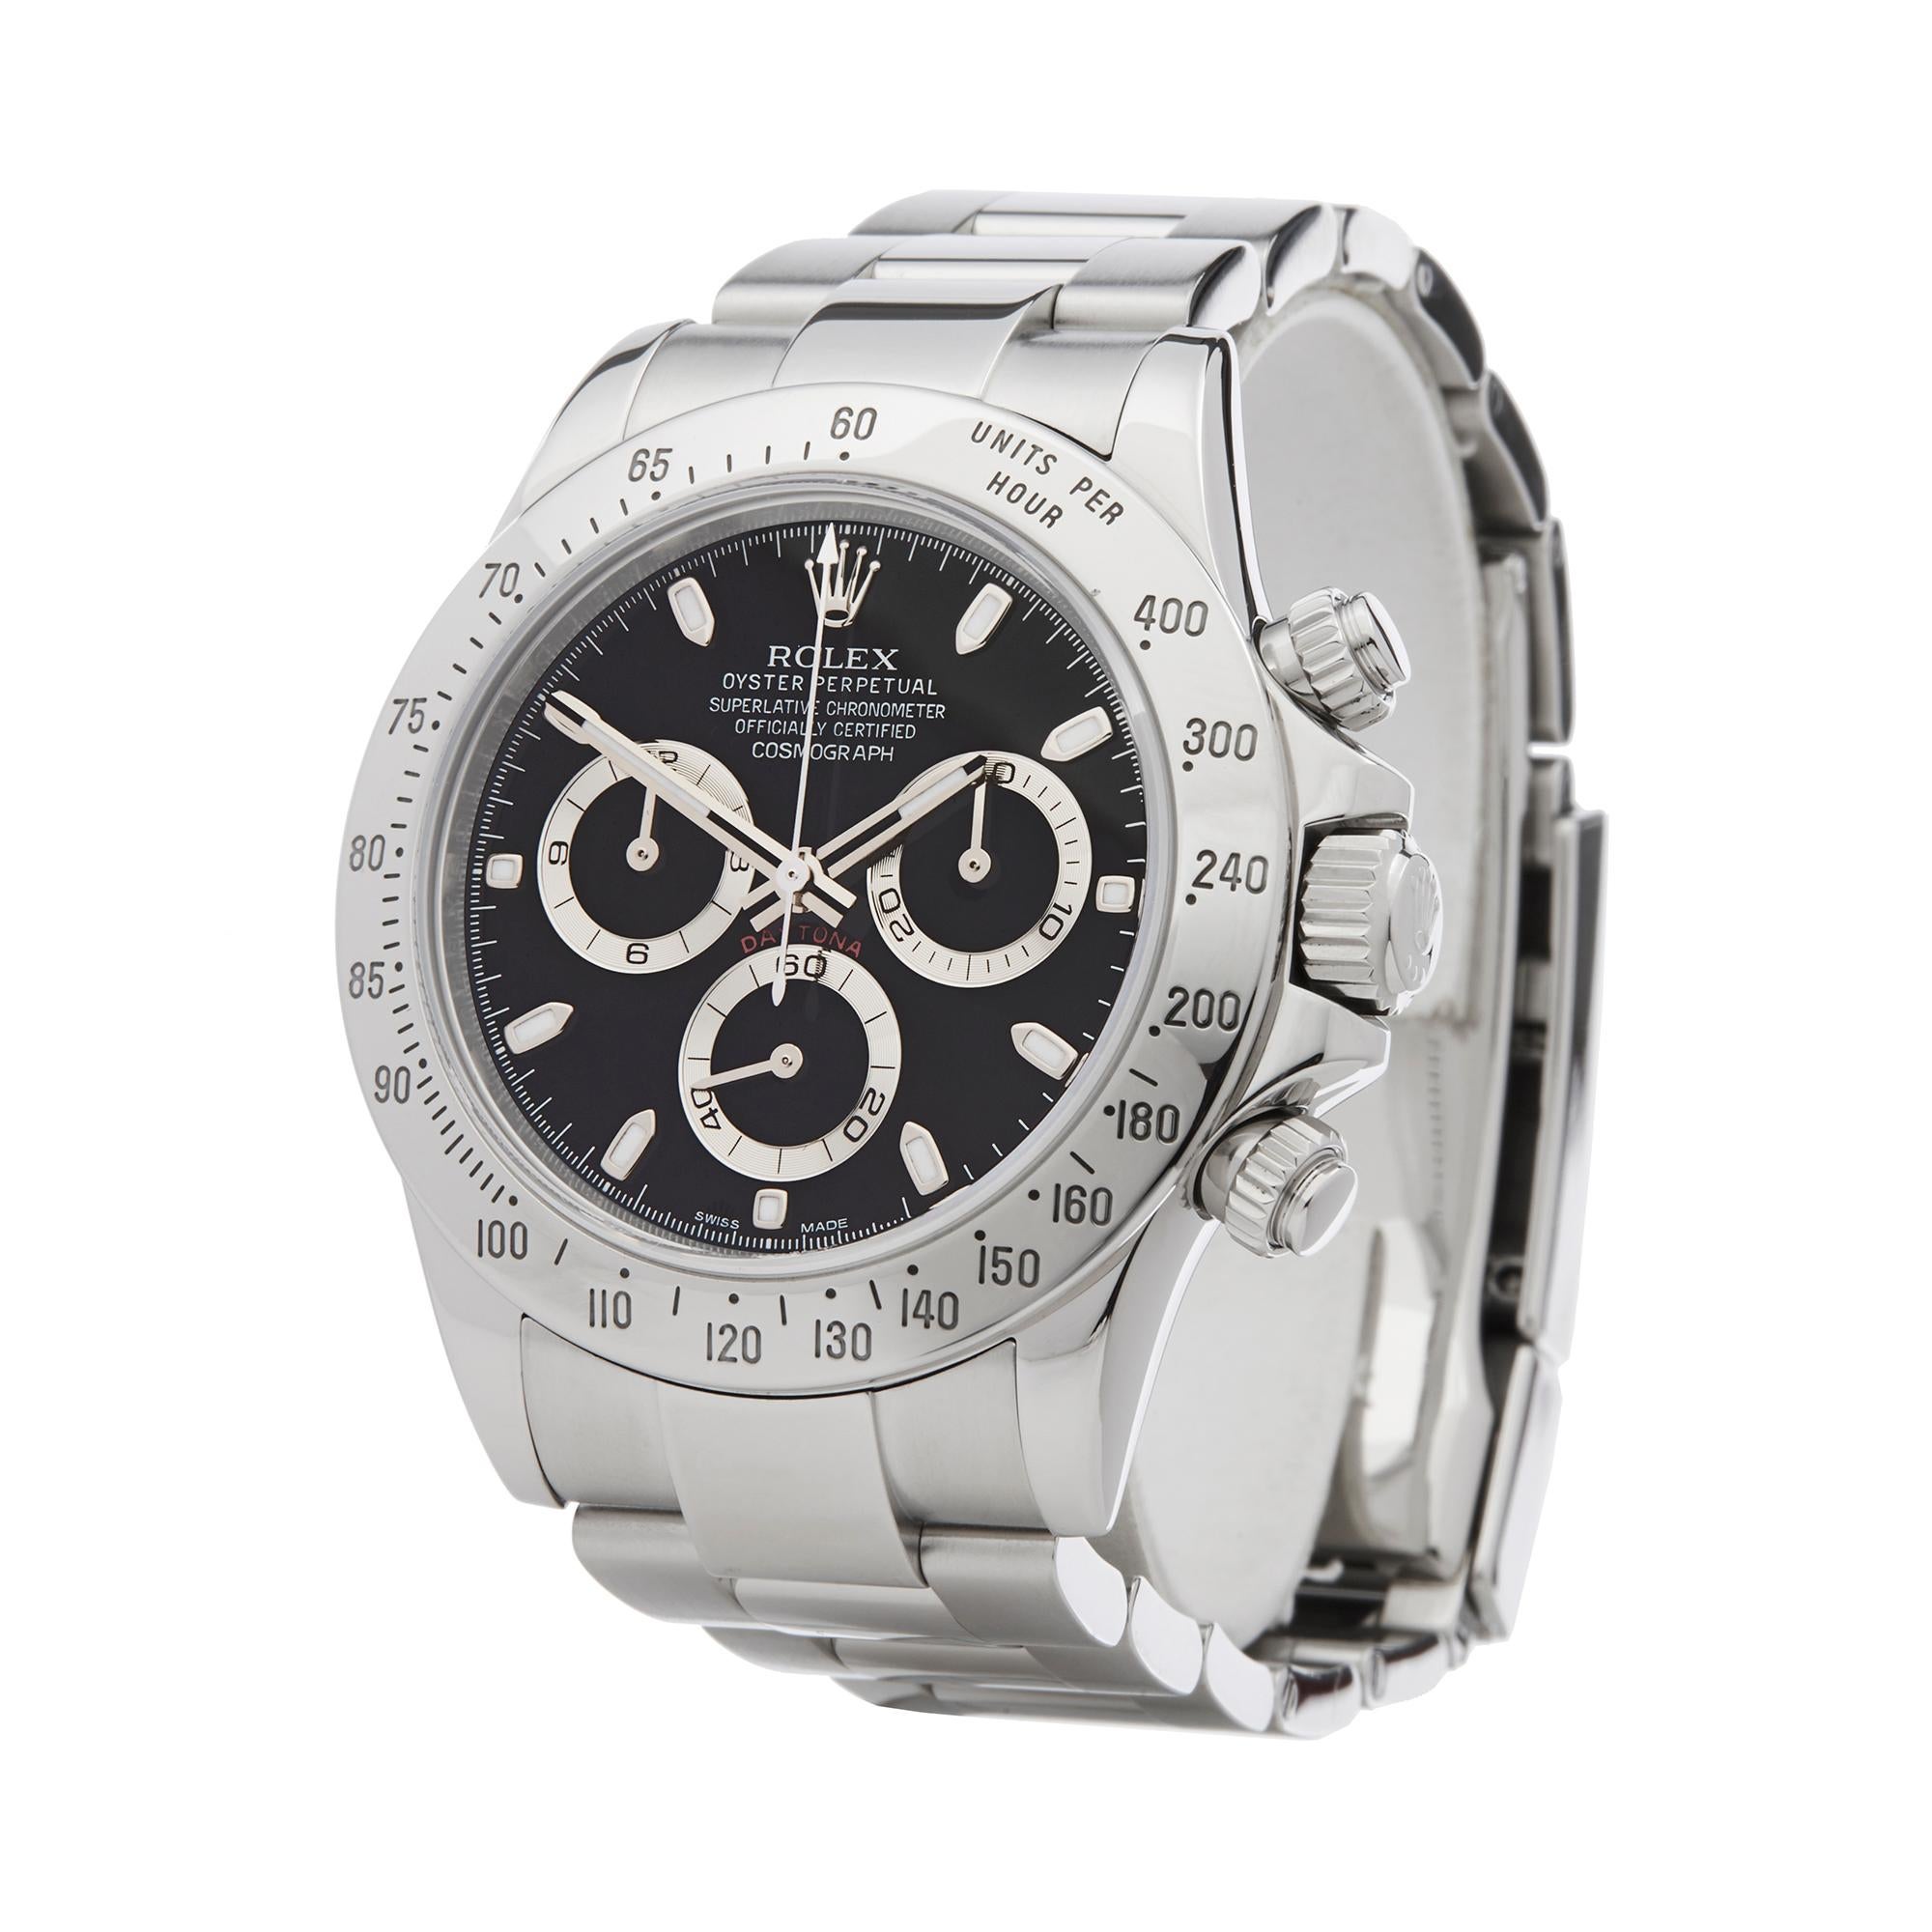 Ref: W6135
Manufacturer: Rolex
Model: Daytona
Model Ref: 116520
Age: October 2015
Gender: Mens
Complete With: Box, Manuals & Guarantee
Dial: Black Baton
Glass: Sapphire Crystal
Movement: Automatic
Water Resistance: To Manufacturers